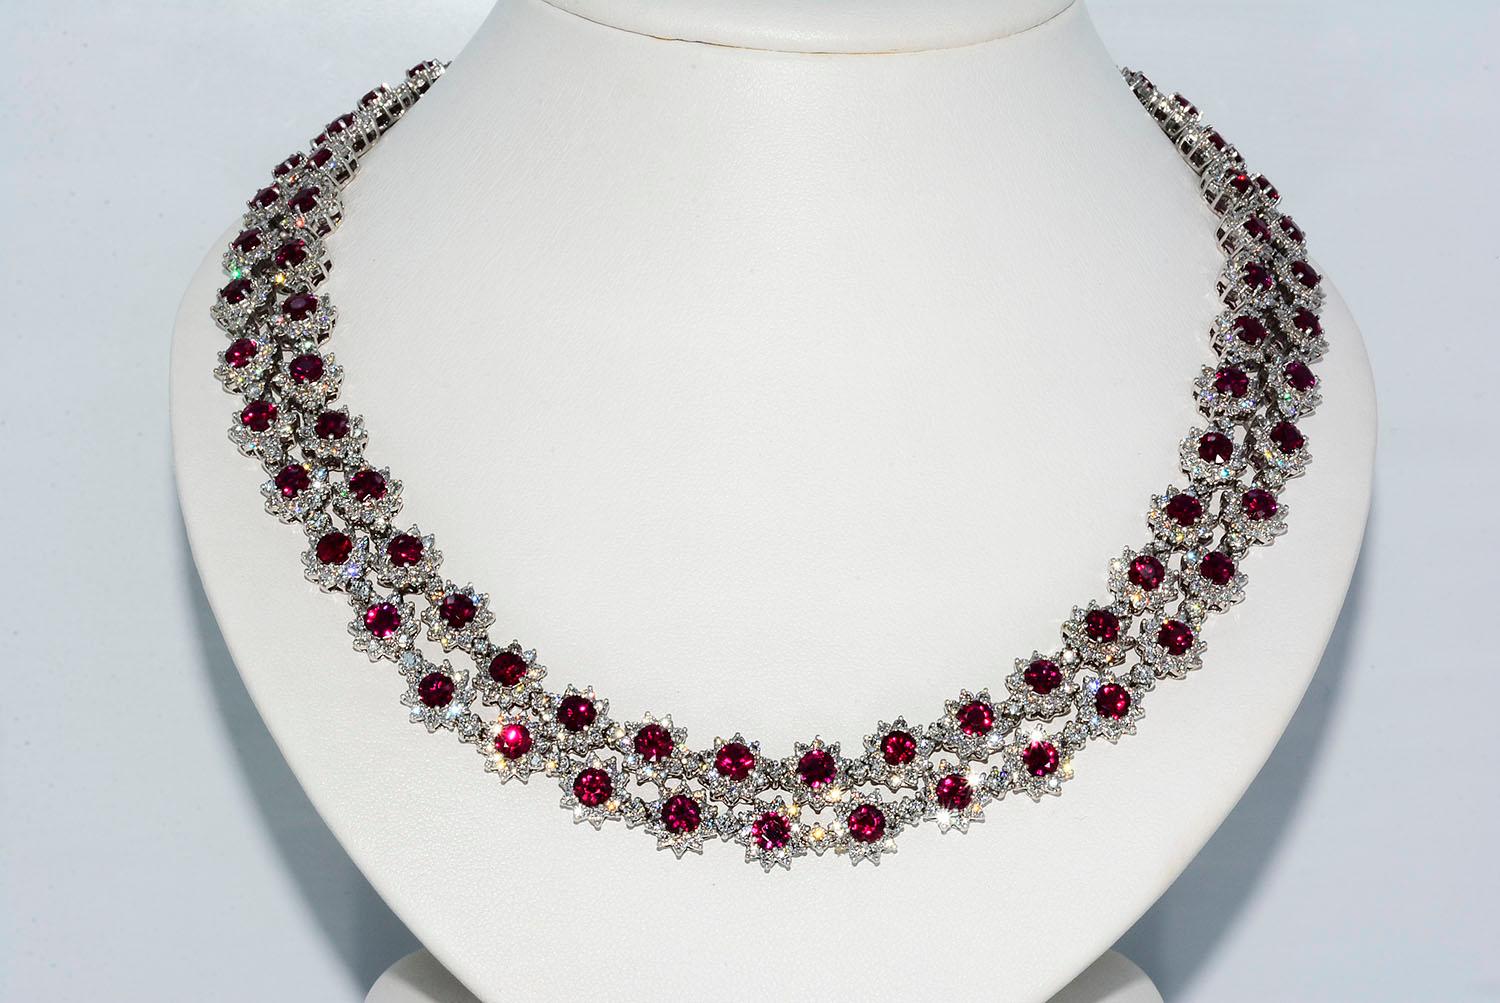 Magnificent Vietnamese Round Ruby Necklace and Matching Earrings 18k White Gold

NECKLACE
Round Vietnamese Rubies 36.07 ct
Round Diamonds 20.04 ct F VS1
18k White Gold
Length 16 Inches
89.9 Grams

BRACELET 

Round Vietnamese Rubies 8.74 ct
Round